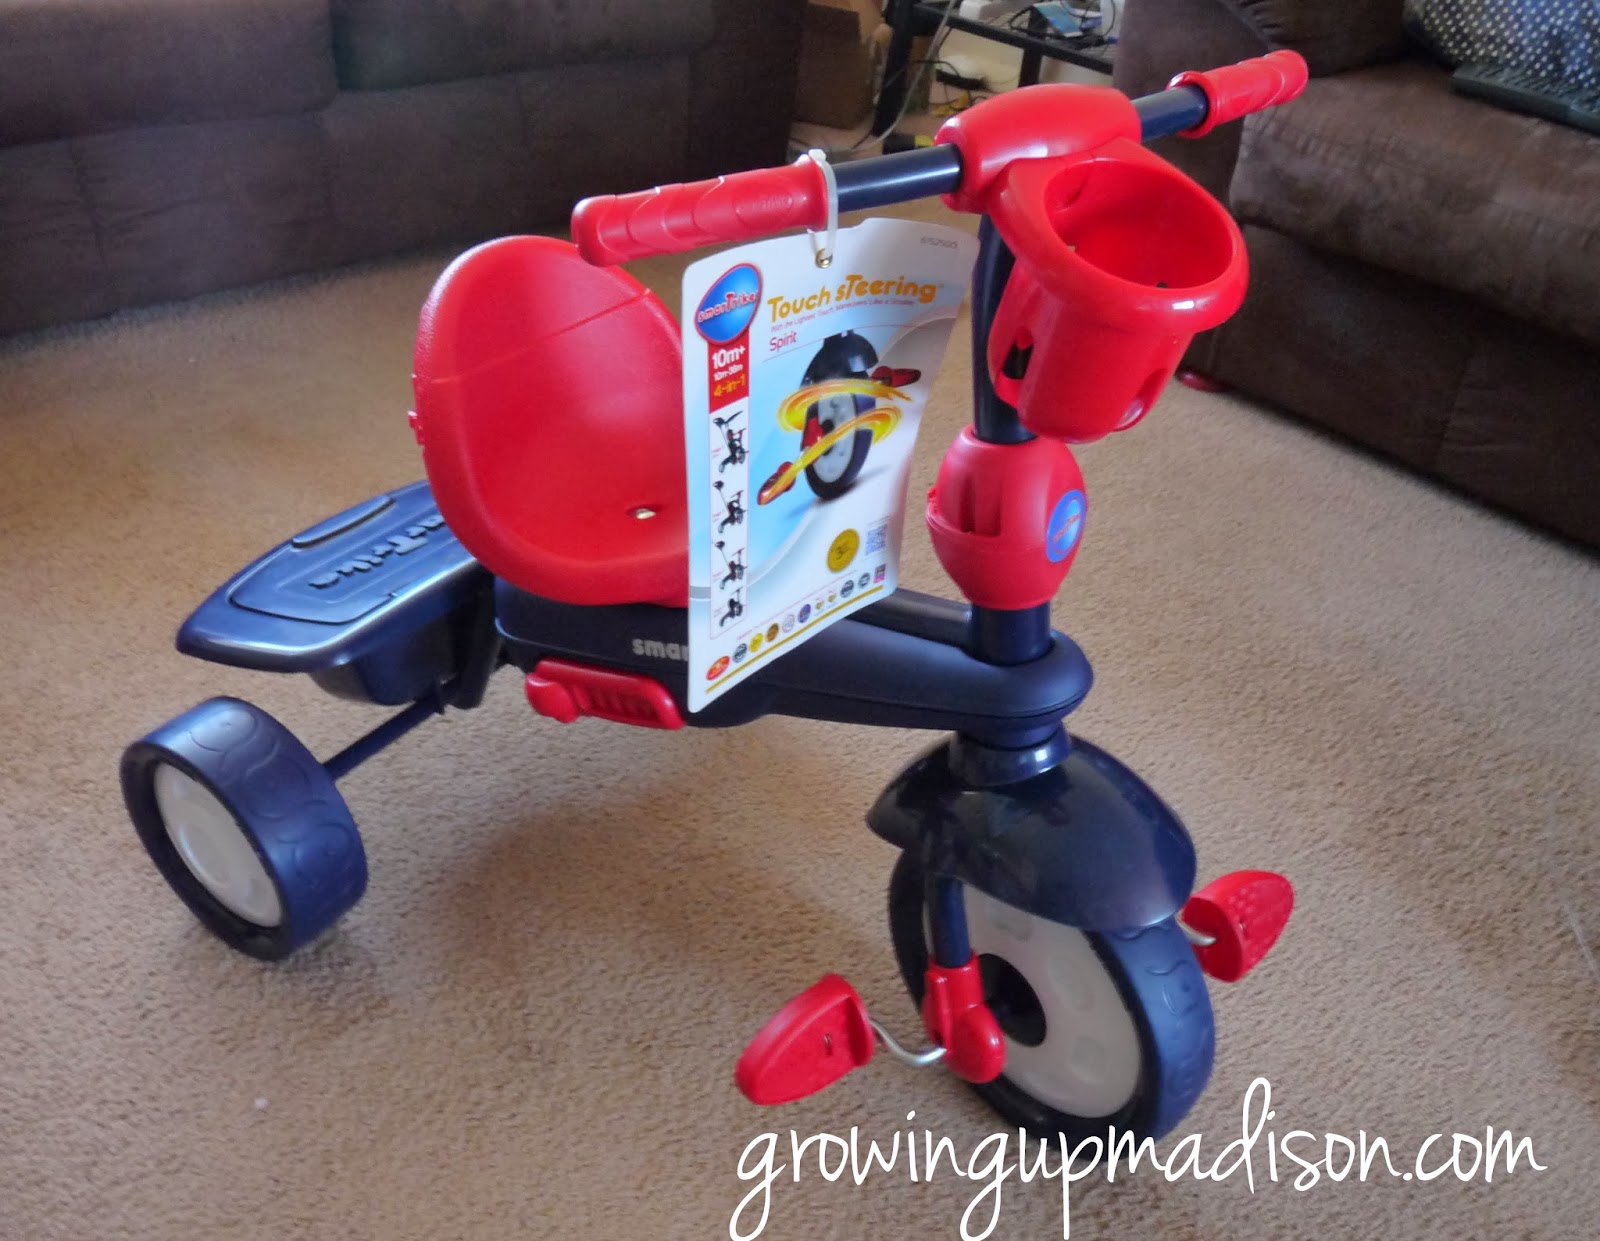 smarTrike® Spirit 4-in-1 Touch Steering System #Review - AnnMarie John